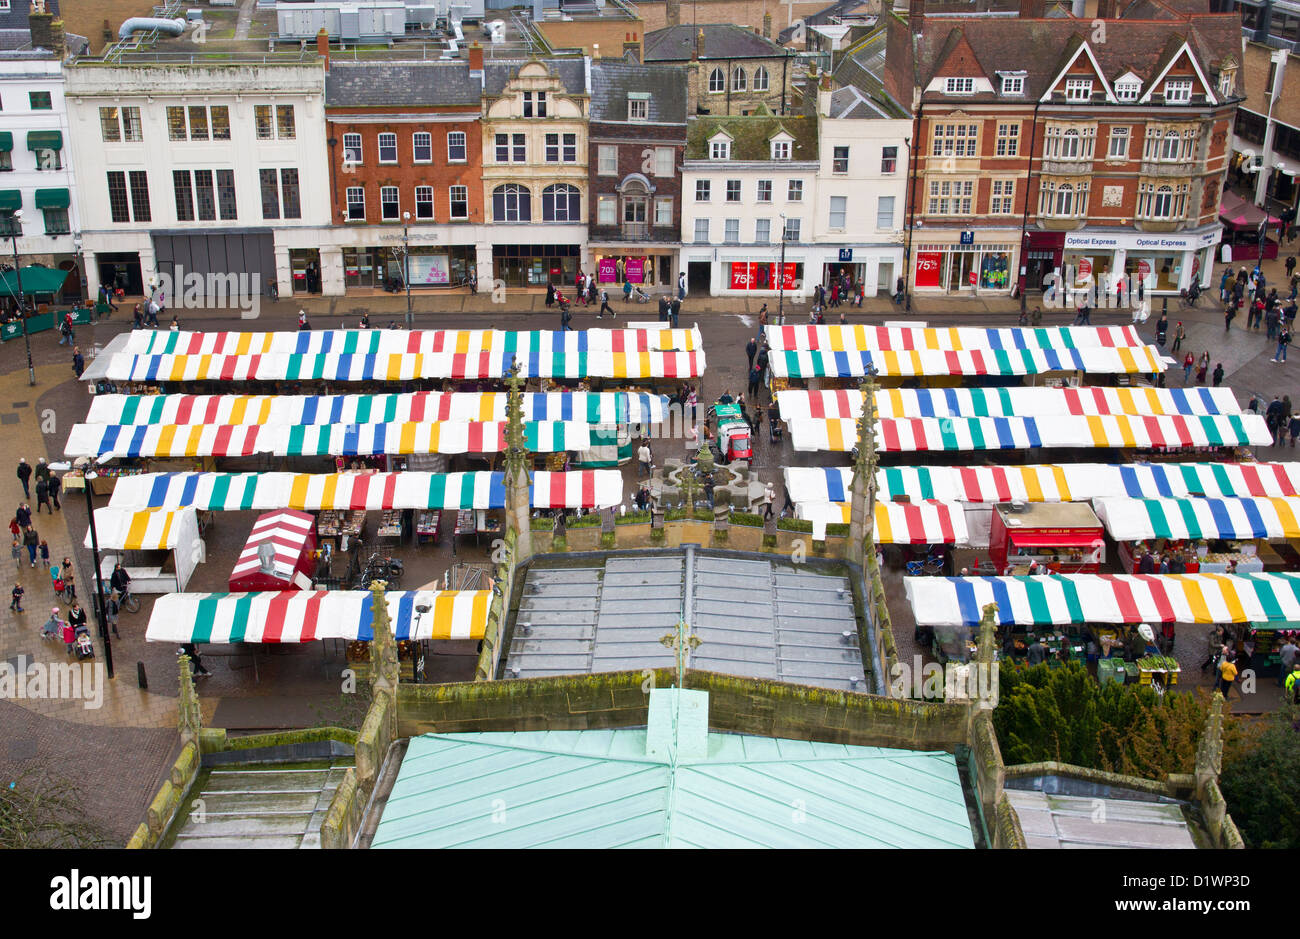 Market Place Cambridge. View from the top of Great St Mary's Church in Central Cambridge.  Winter Scene. Stock Photo